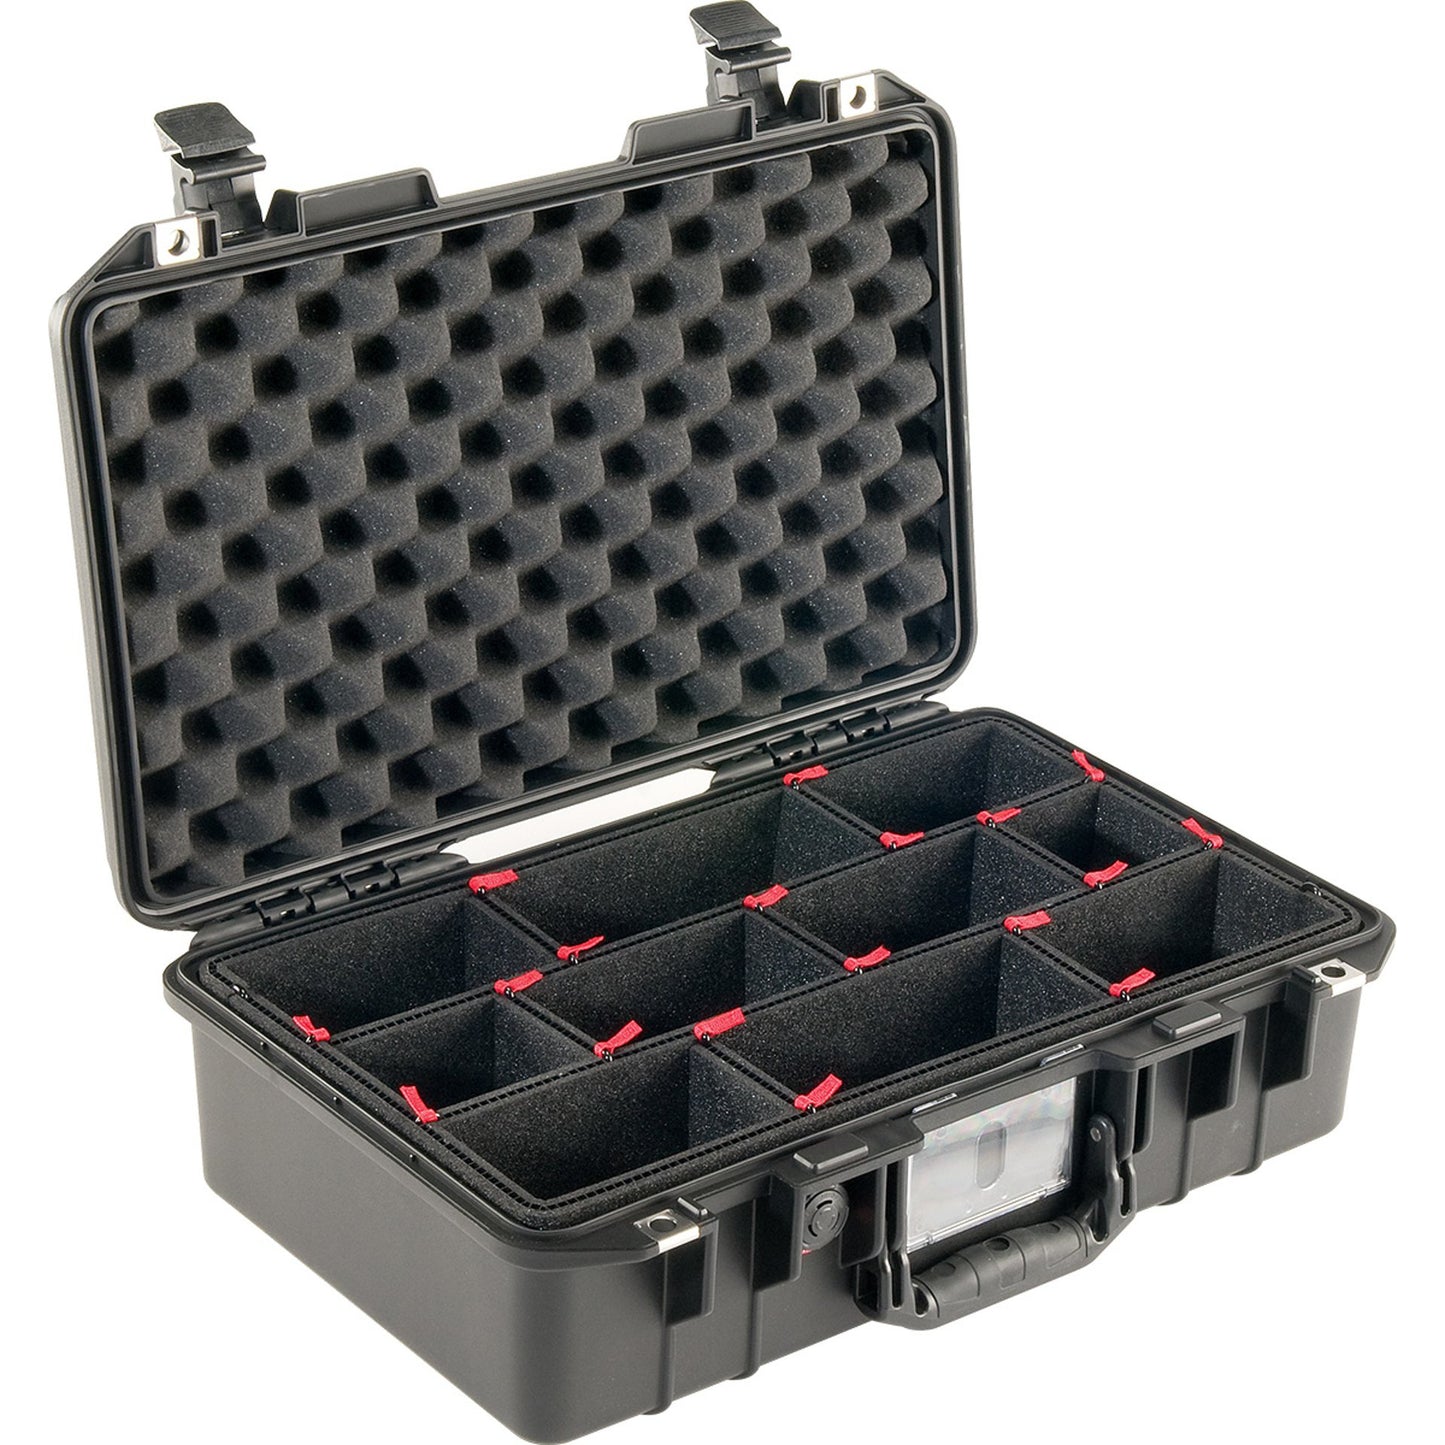 Pelican Air Honeycomb Structed HPX Polymer Lightweight Watertight Case with Pick-N-Pluck Foam (BLACK, SILVER, YELLOW, BLACK w/ TREKPAK DIVIDER SYSTEM) | Model - 1485 WF / TP